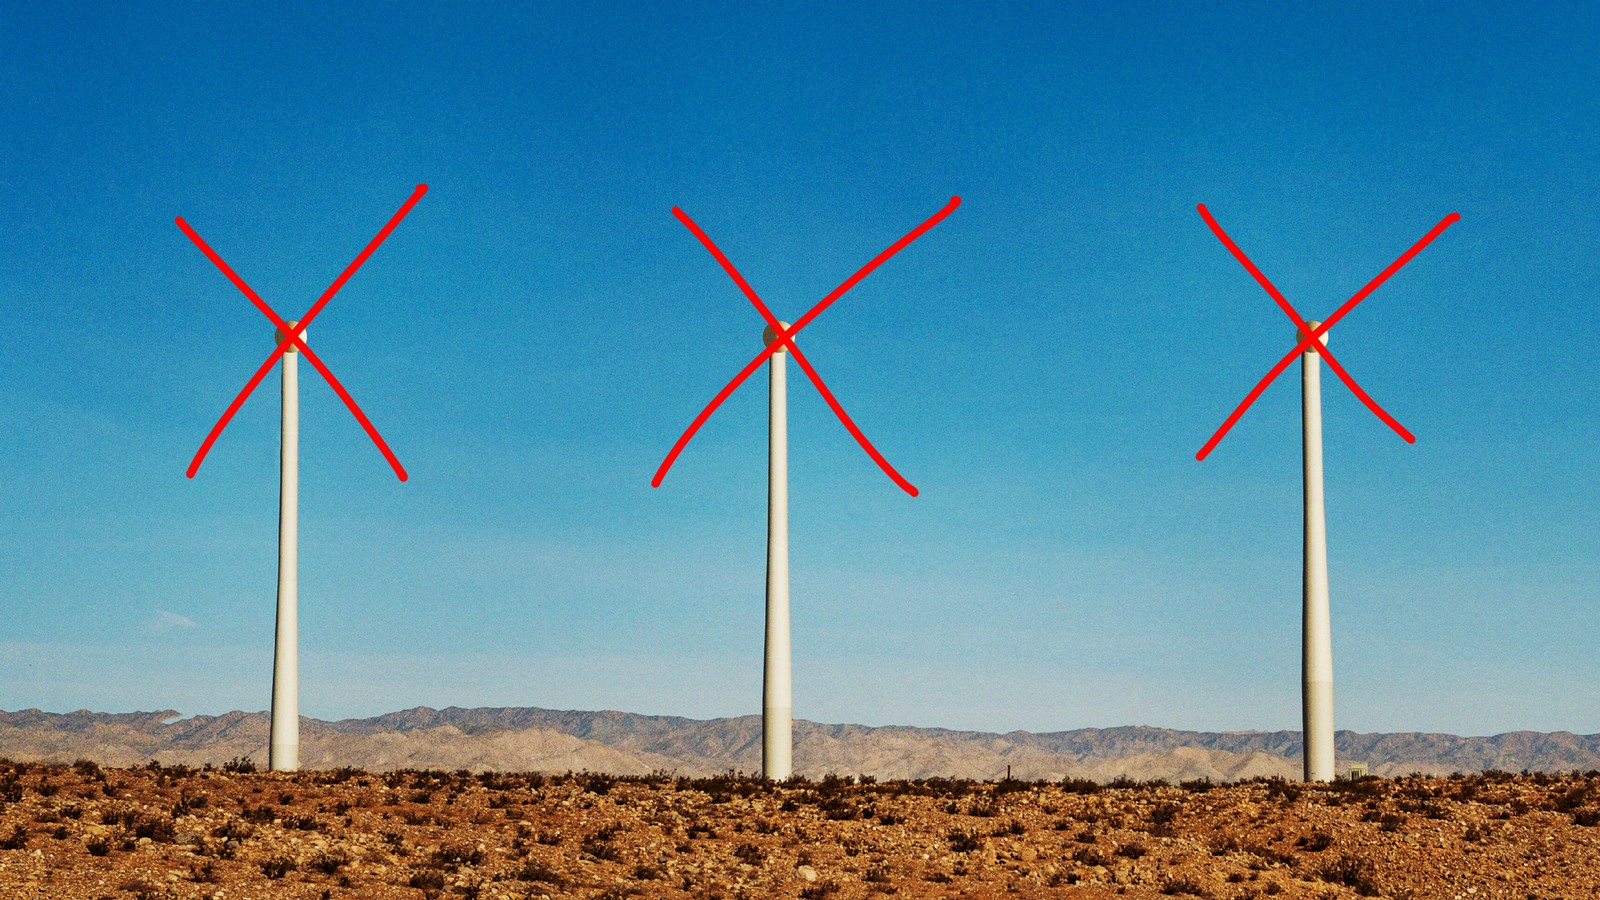 Wind Power Sources Remain More Fantasy than Reality: News: The